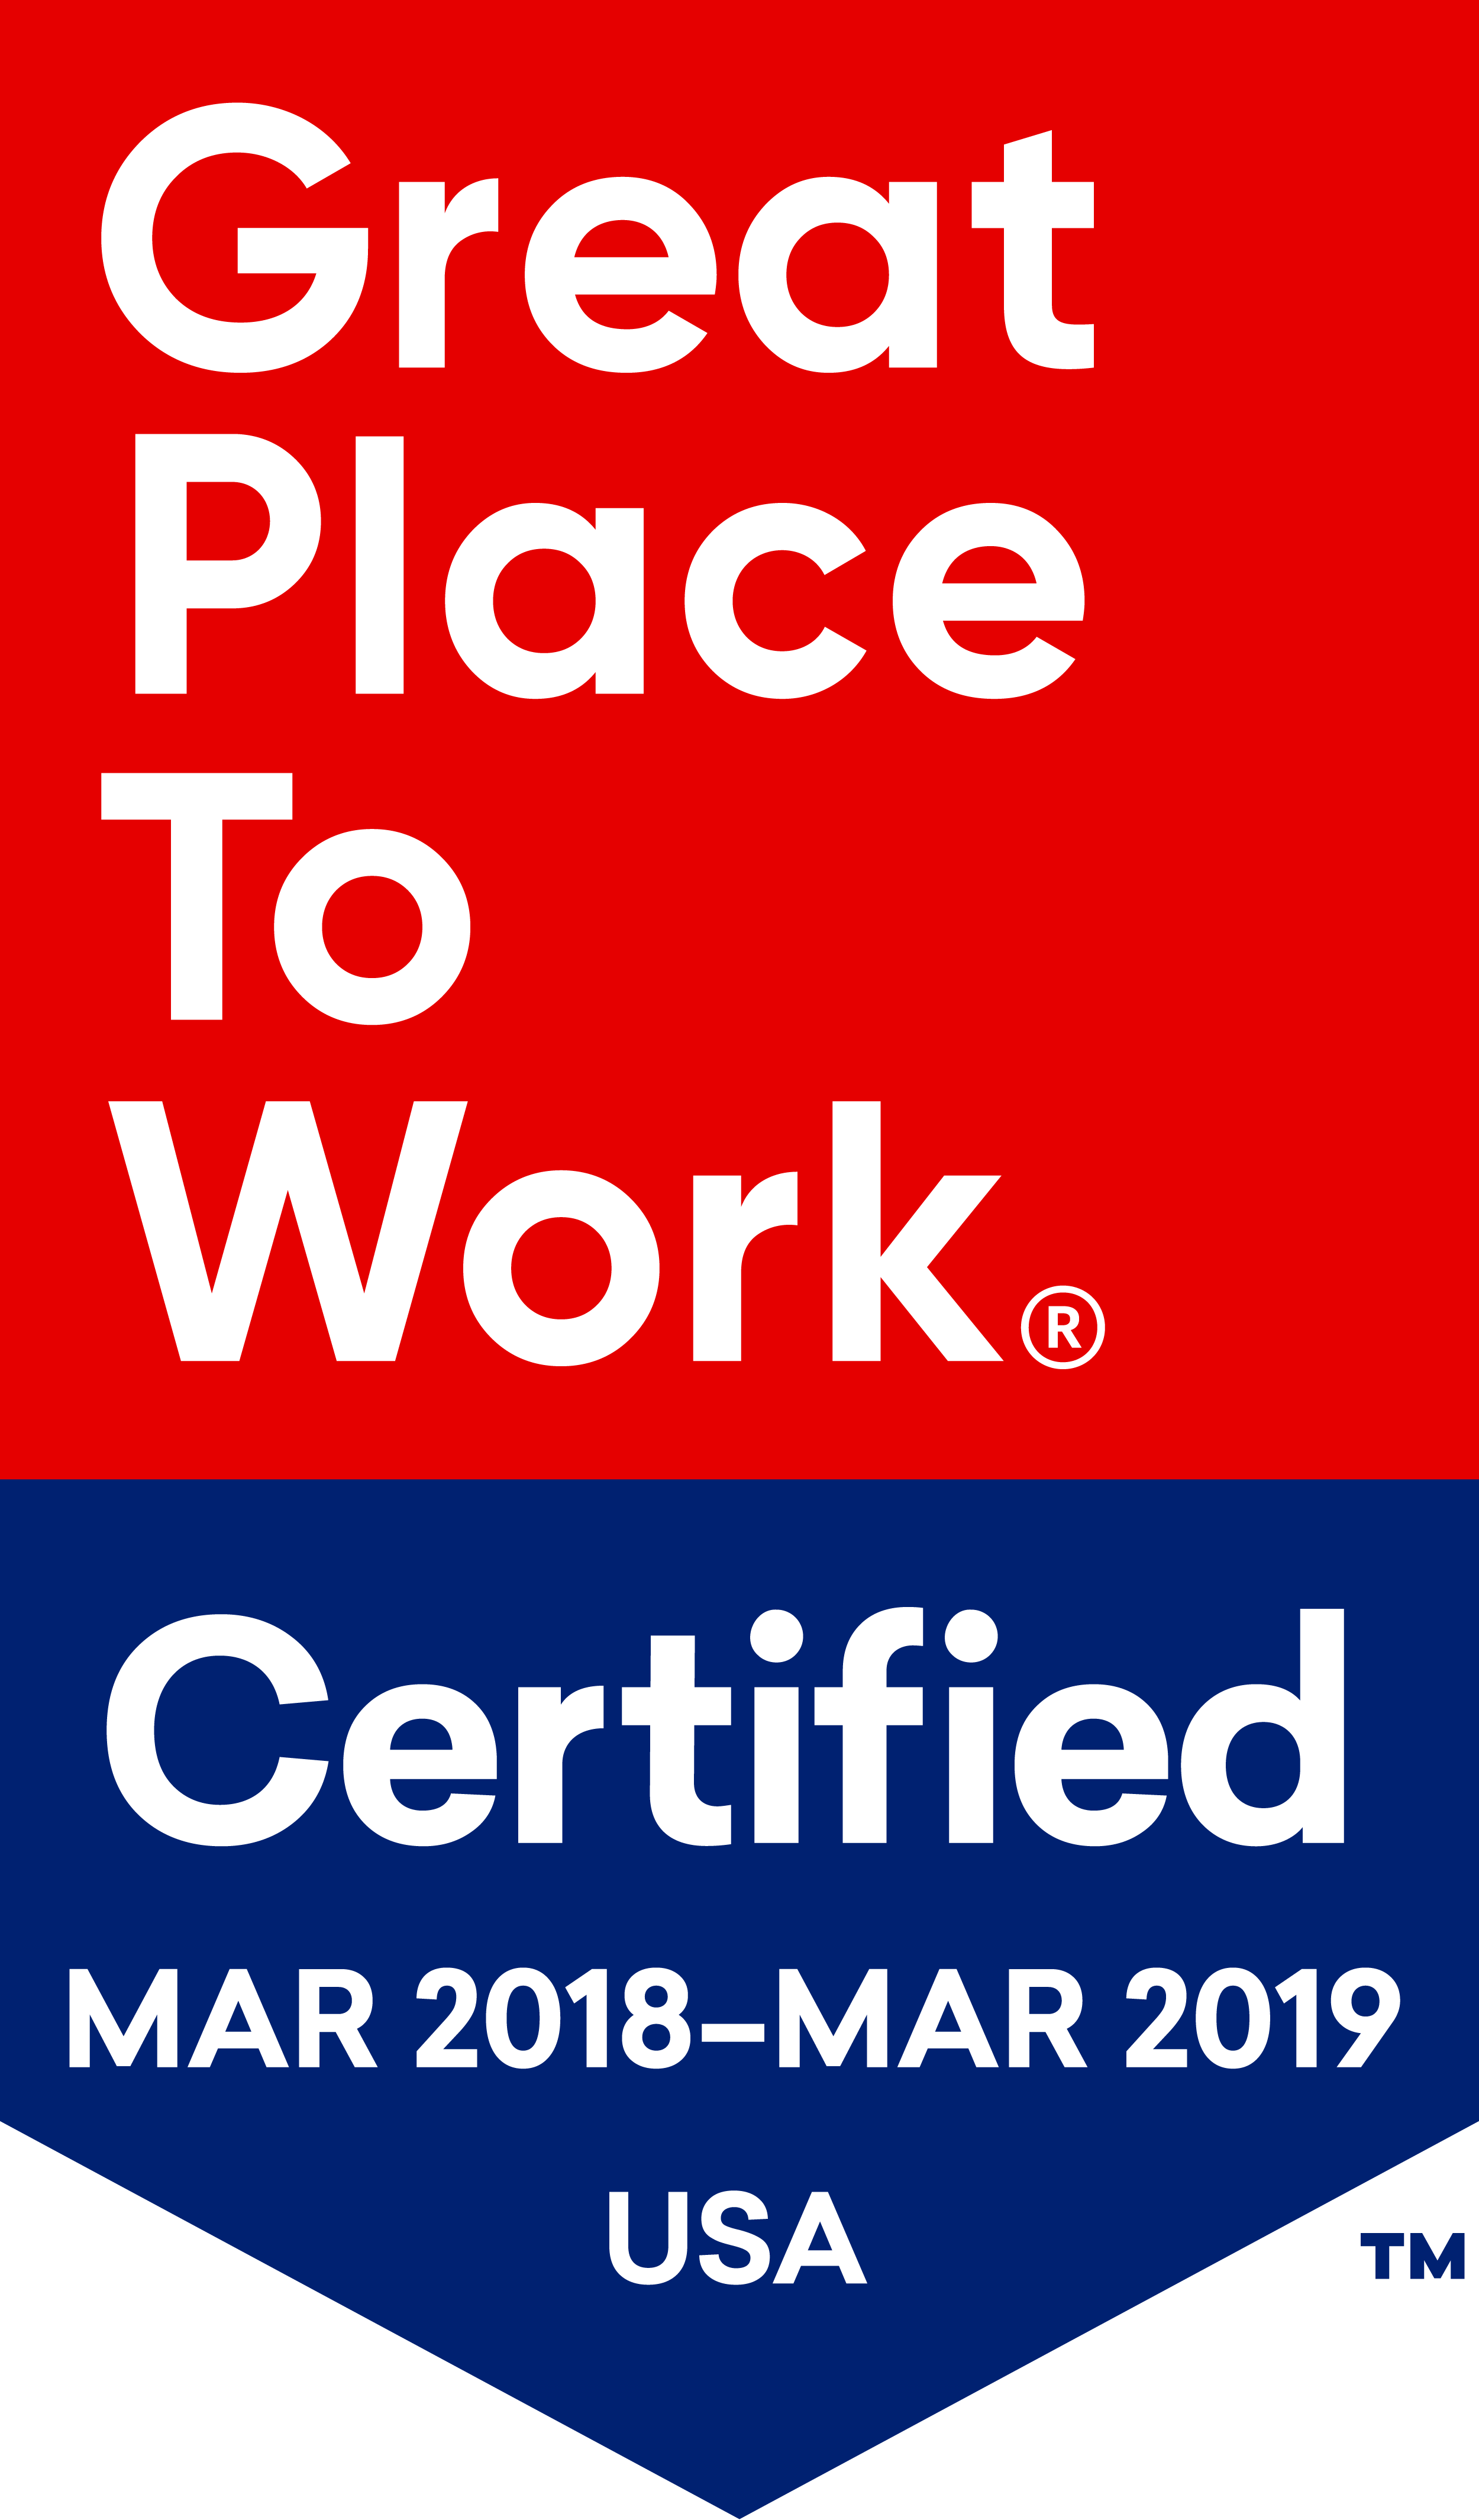 Logistics Plus Certified as a Great Place to Work